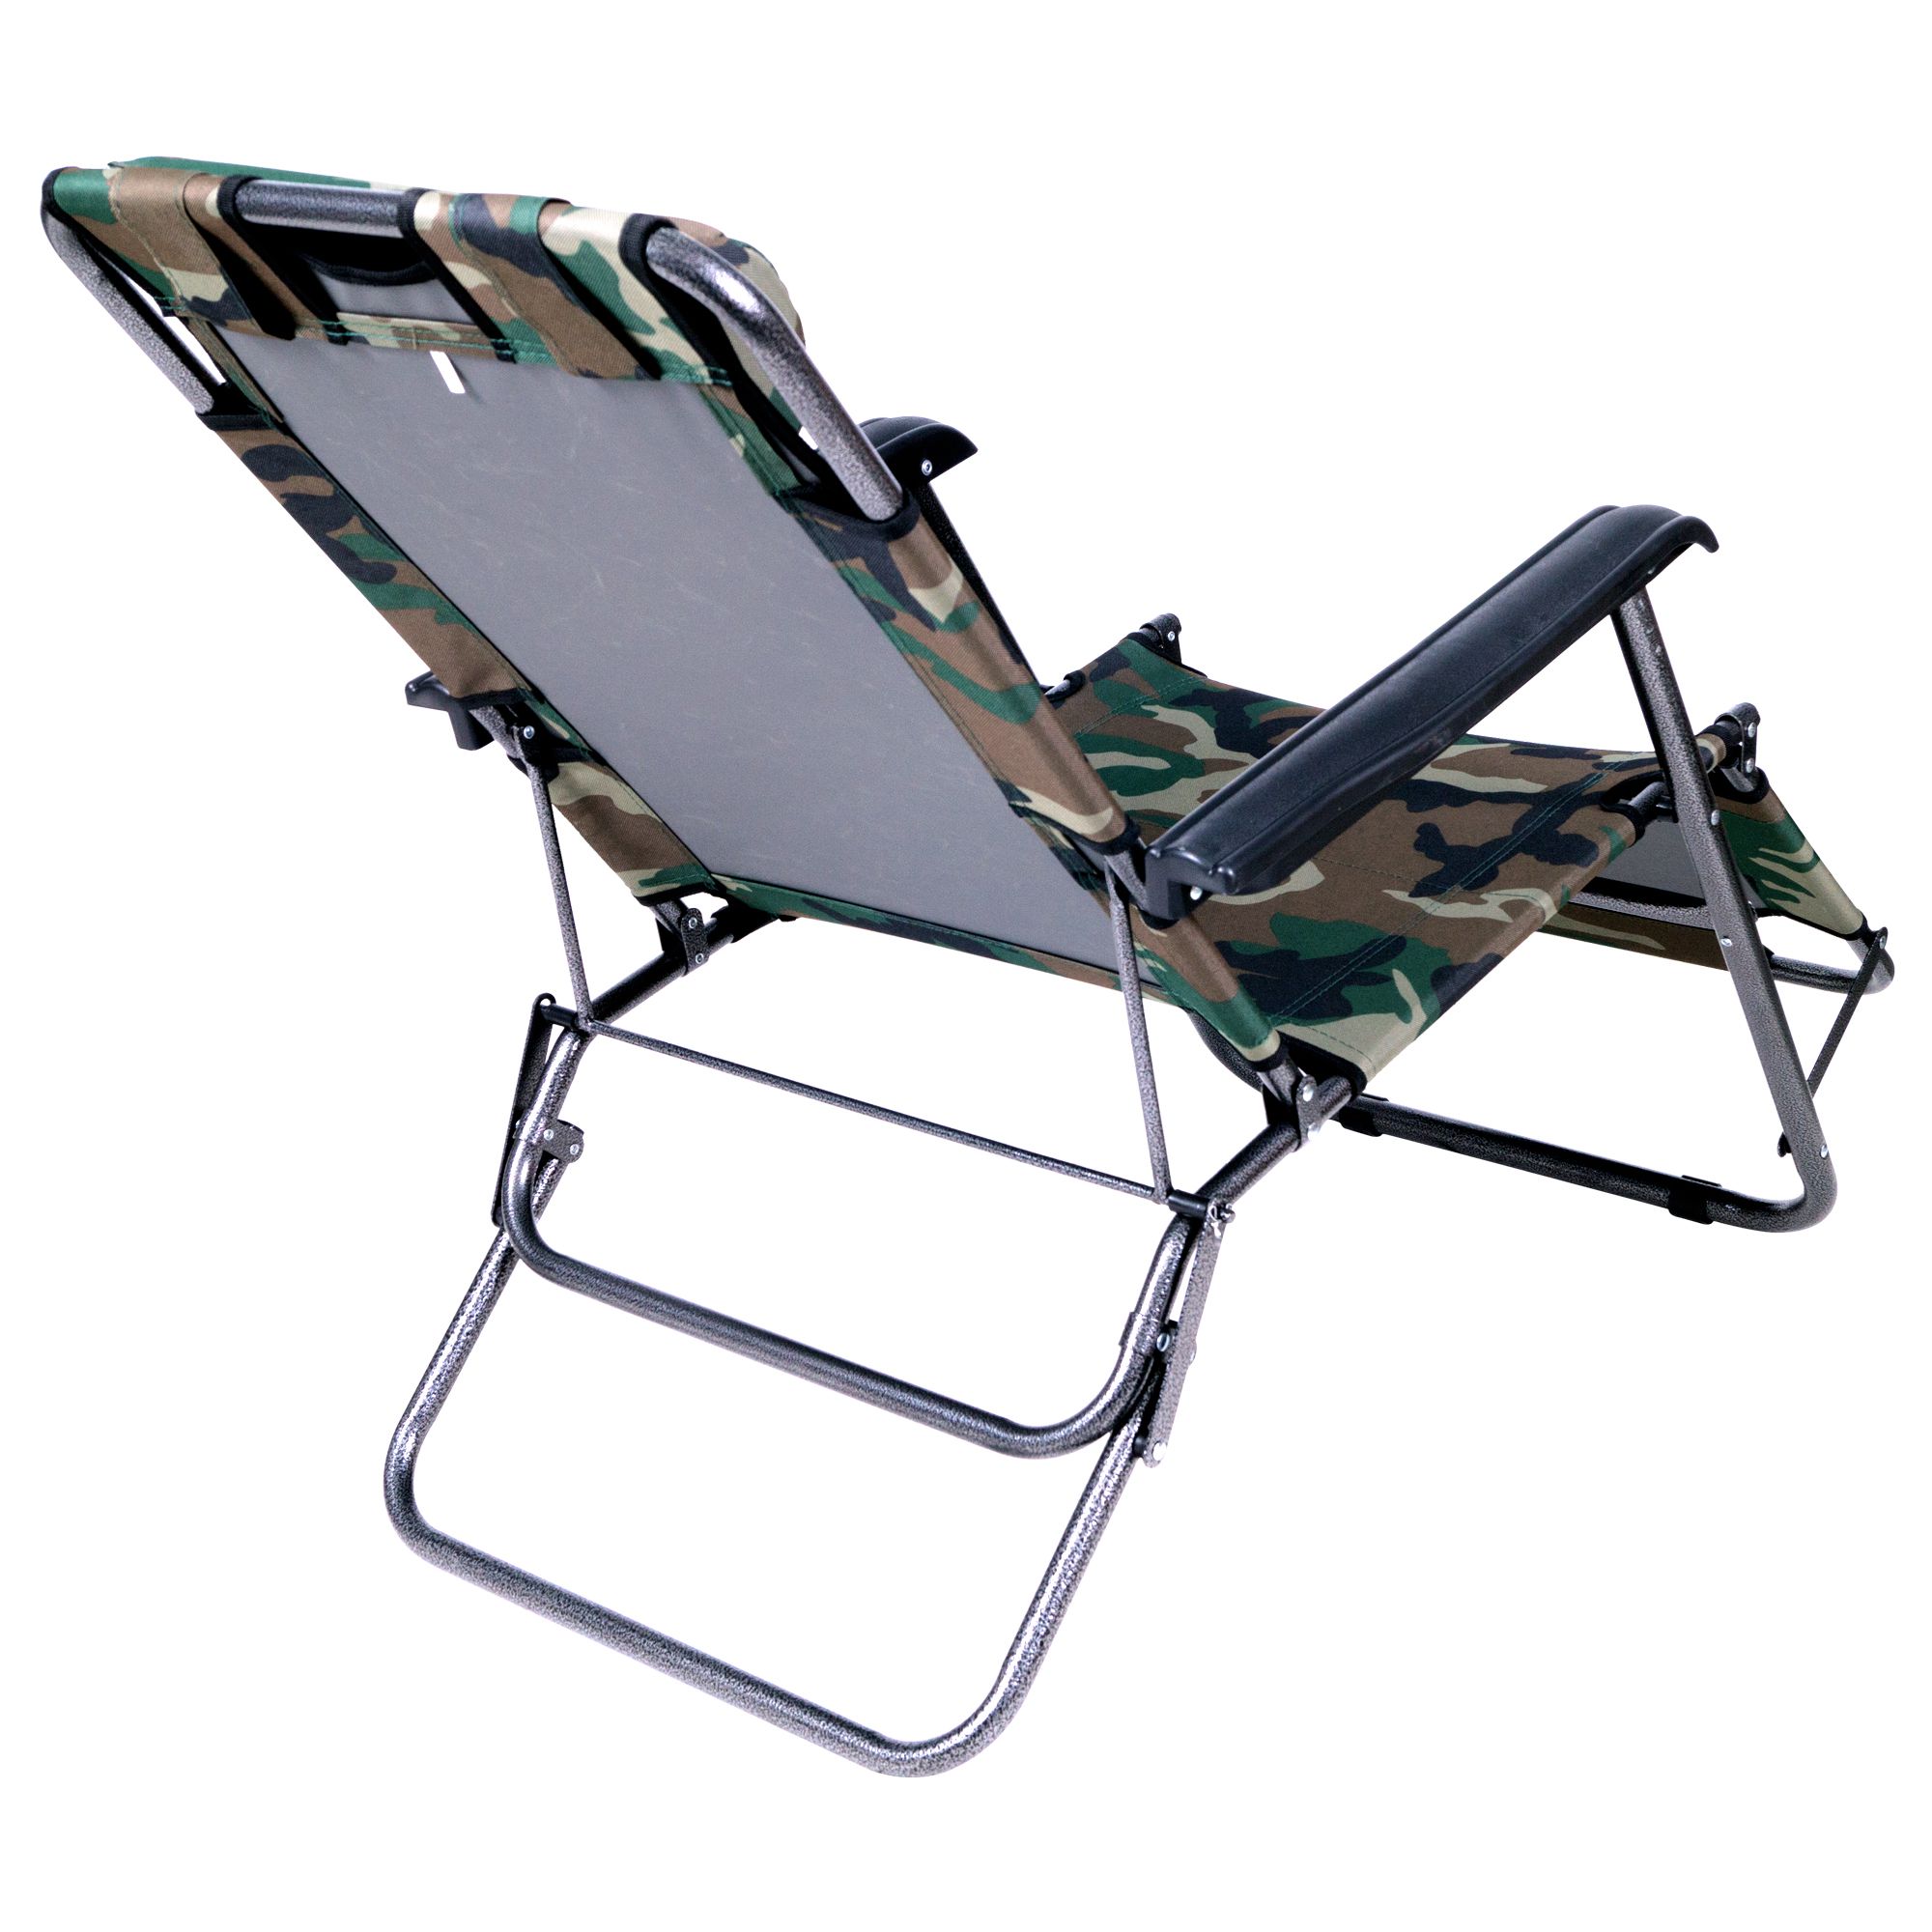 Creatice Outdoor Chairs Cheap India for Small Space